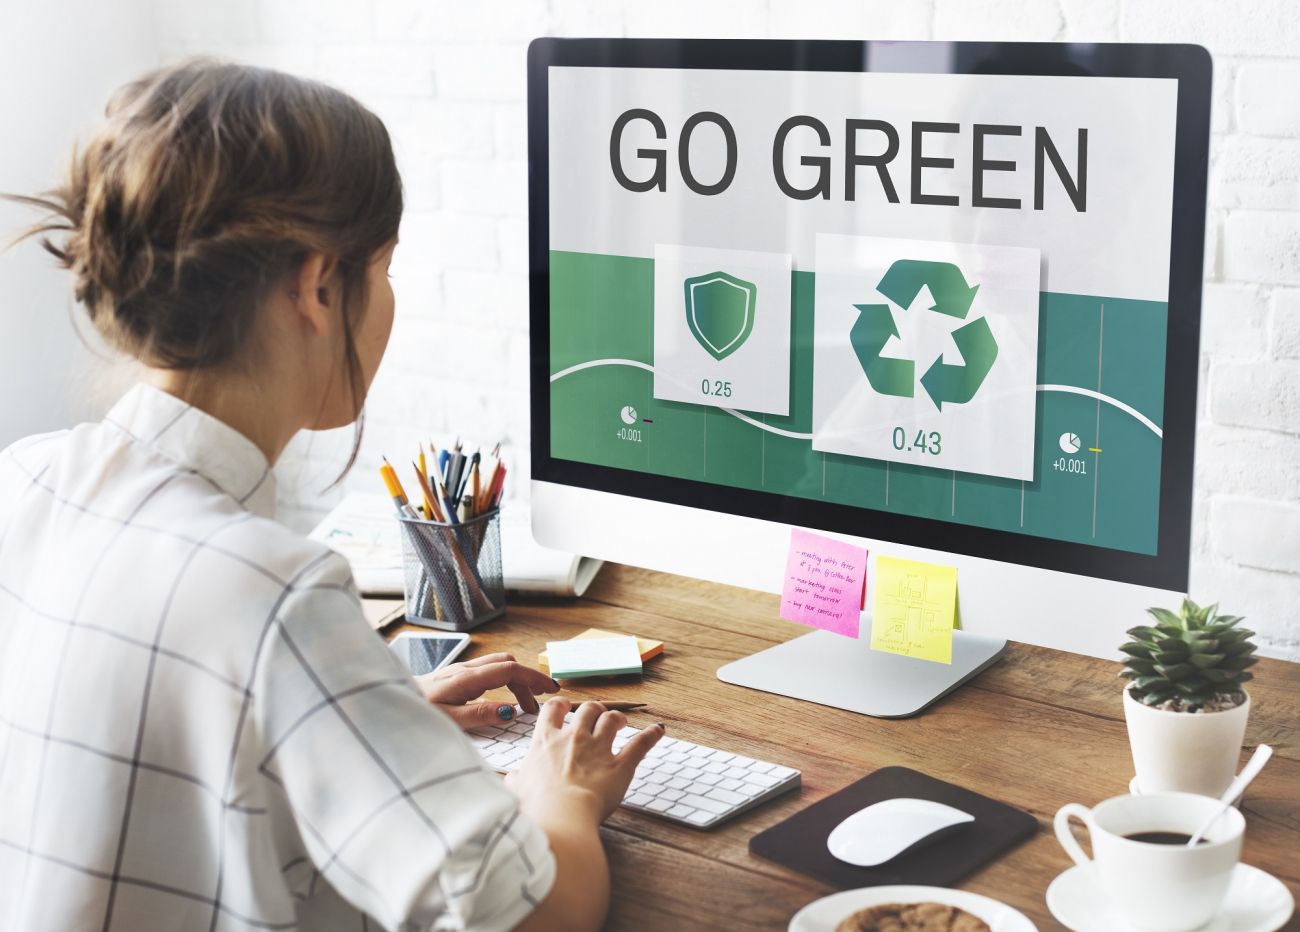 Go Green in 2022 with an ECO business plan